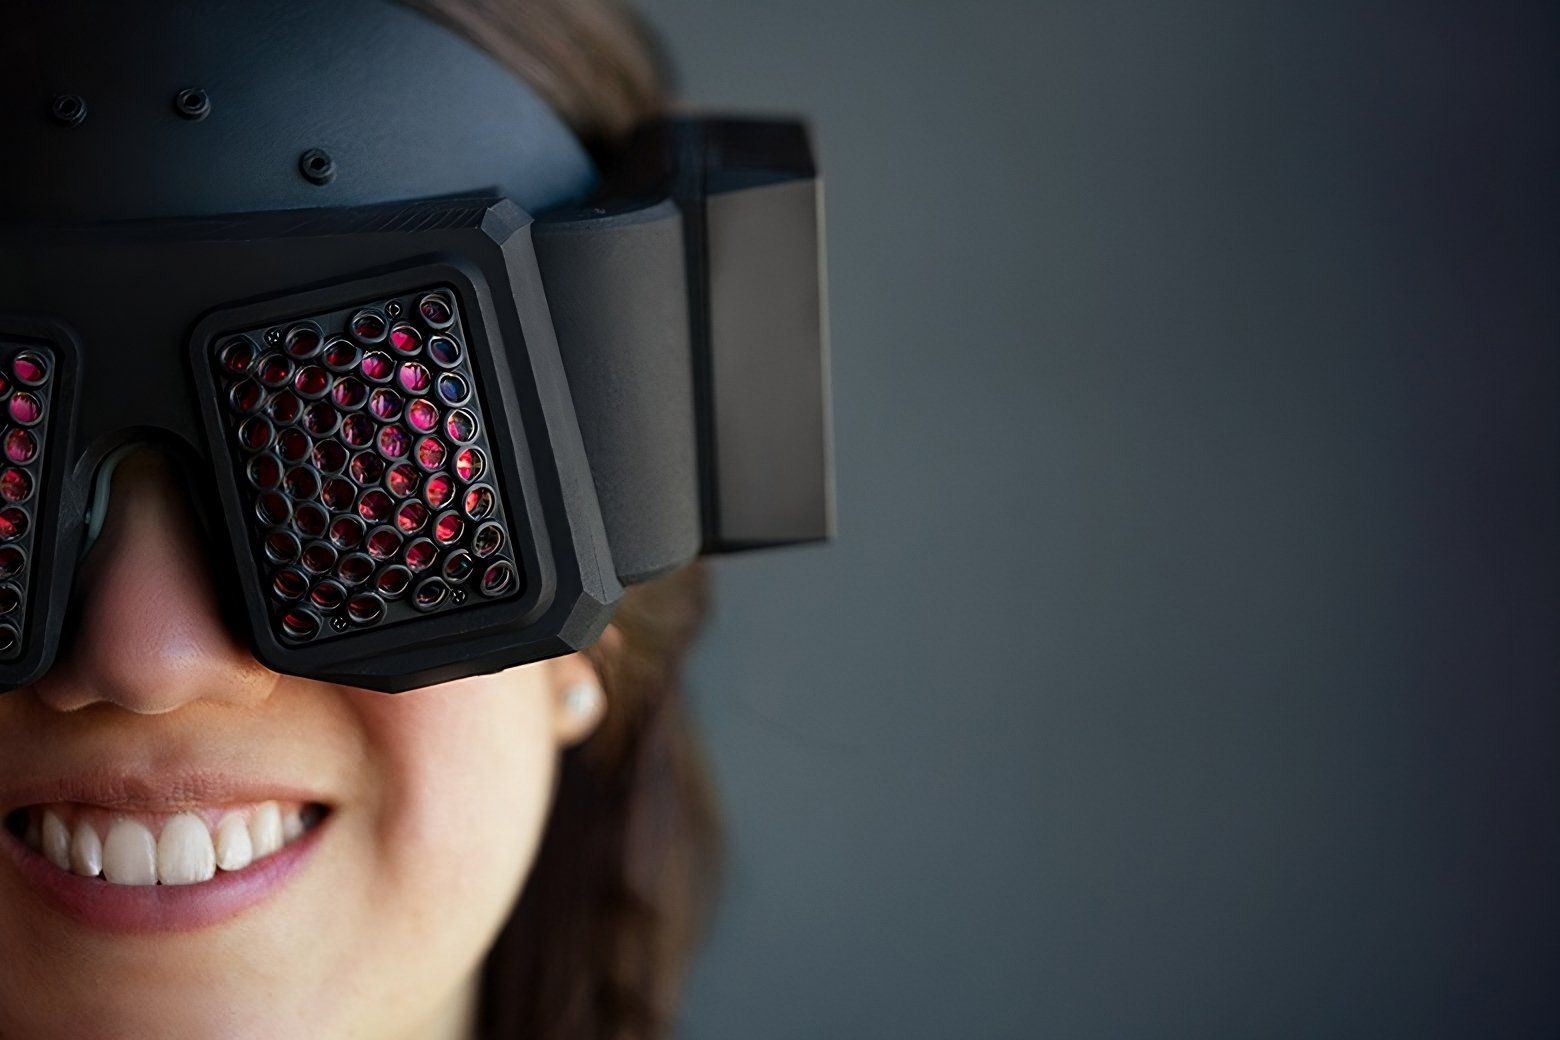 A photo of a woman wearing a black headset that has glowing red buglike lenses.